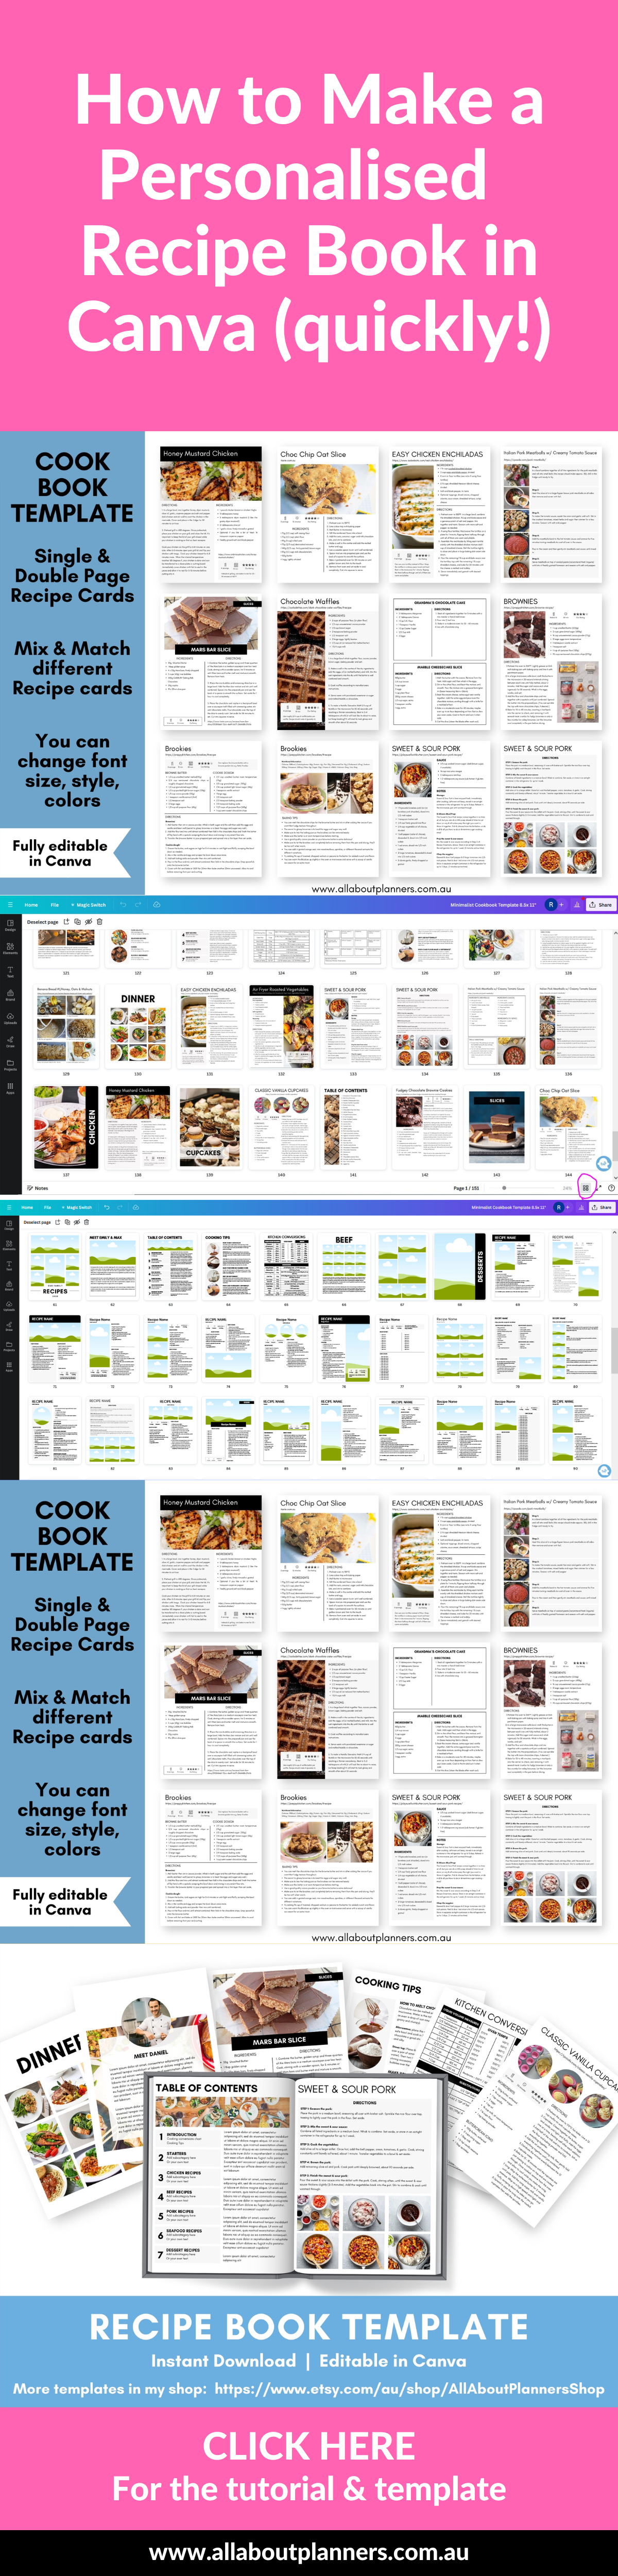 how to make a personalised recipe book in canva quickly template recipe card cooking tips kitchen conversions simple minimalist